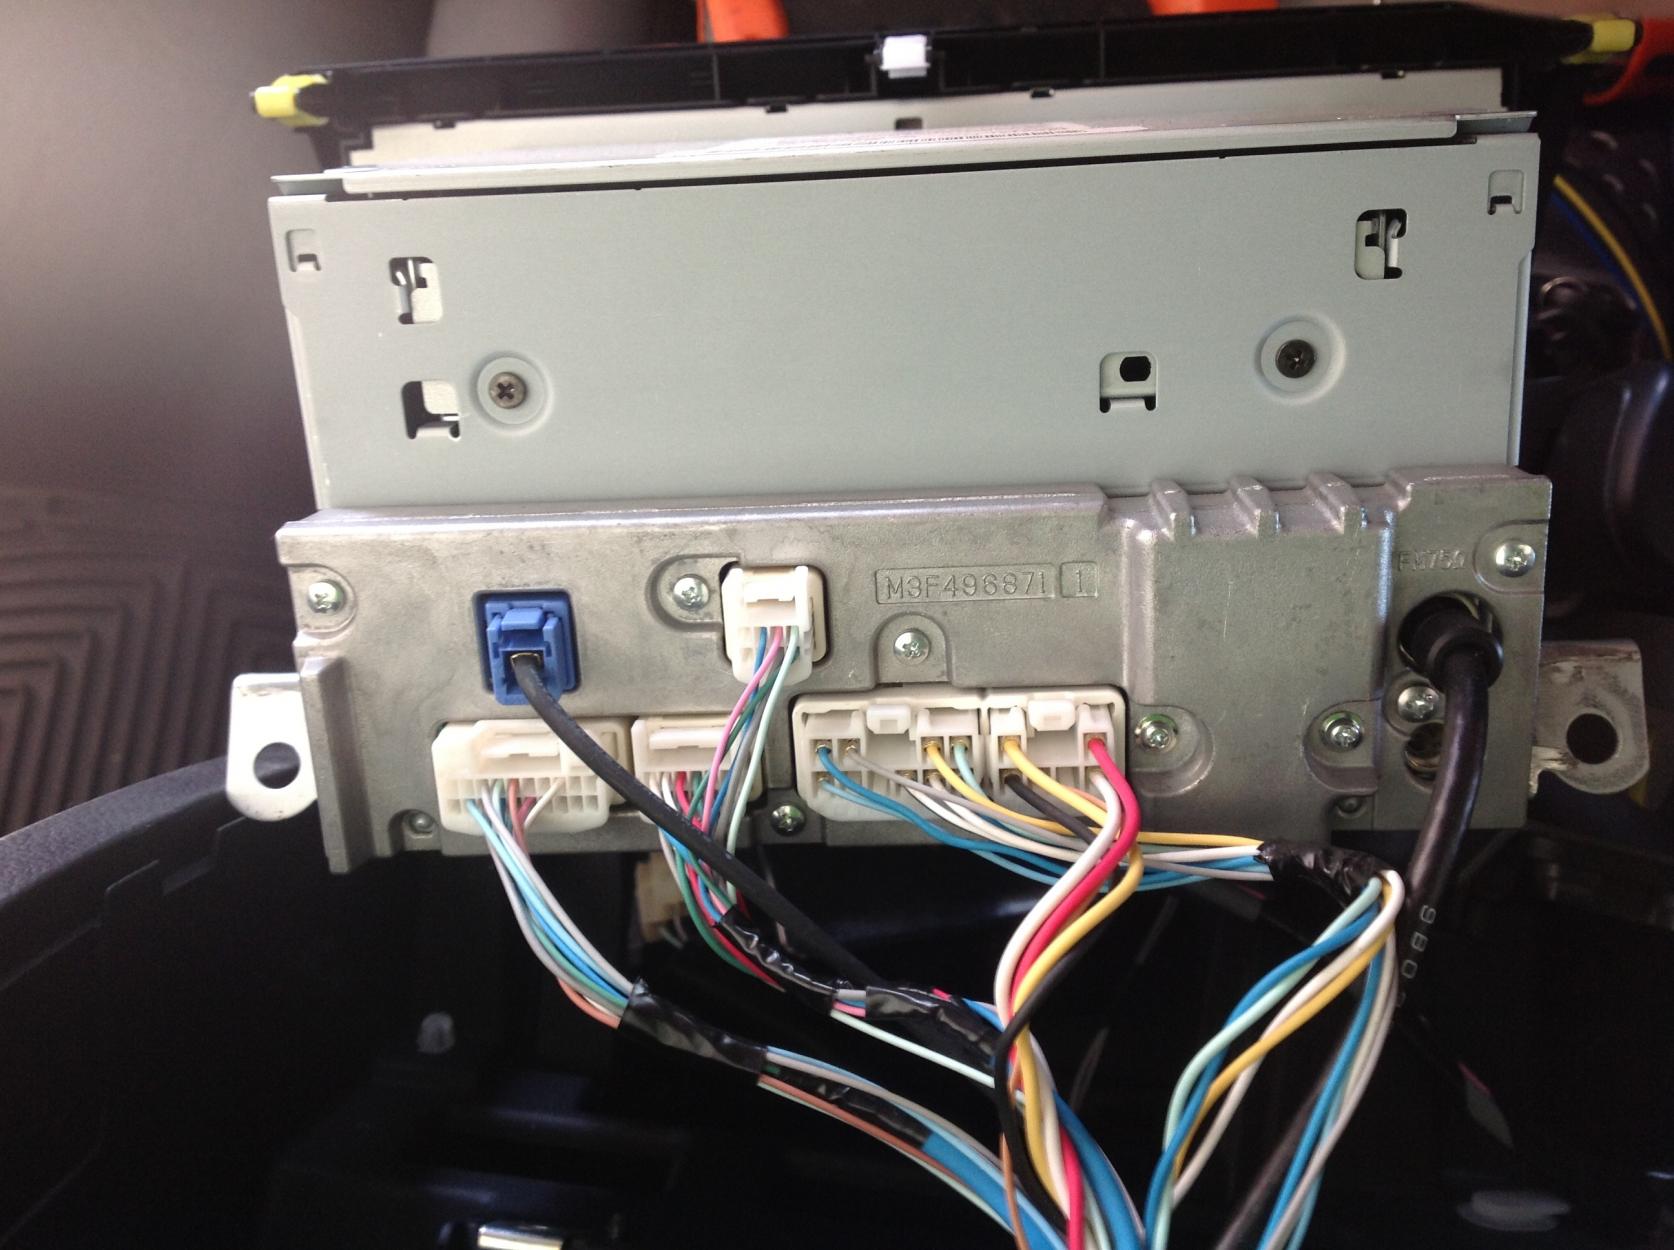 What Color Wires Go Together In A Car Stereo?